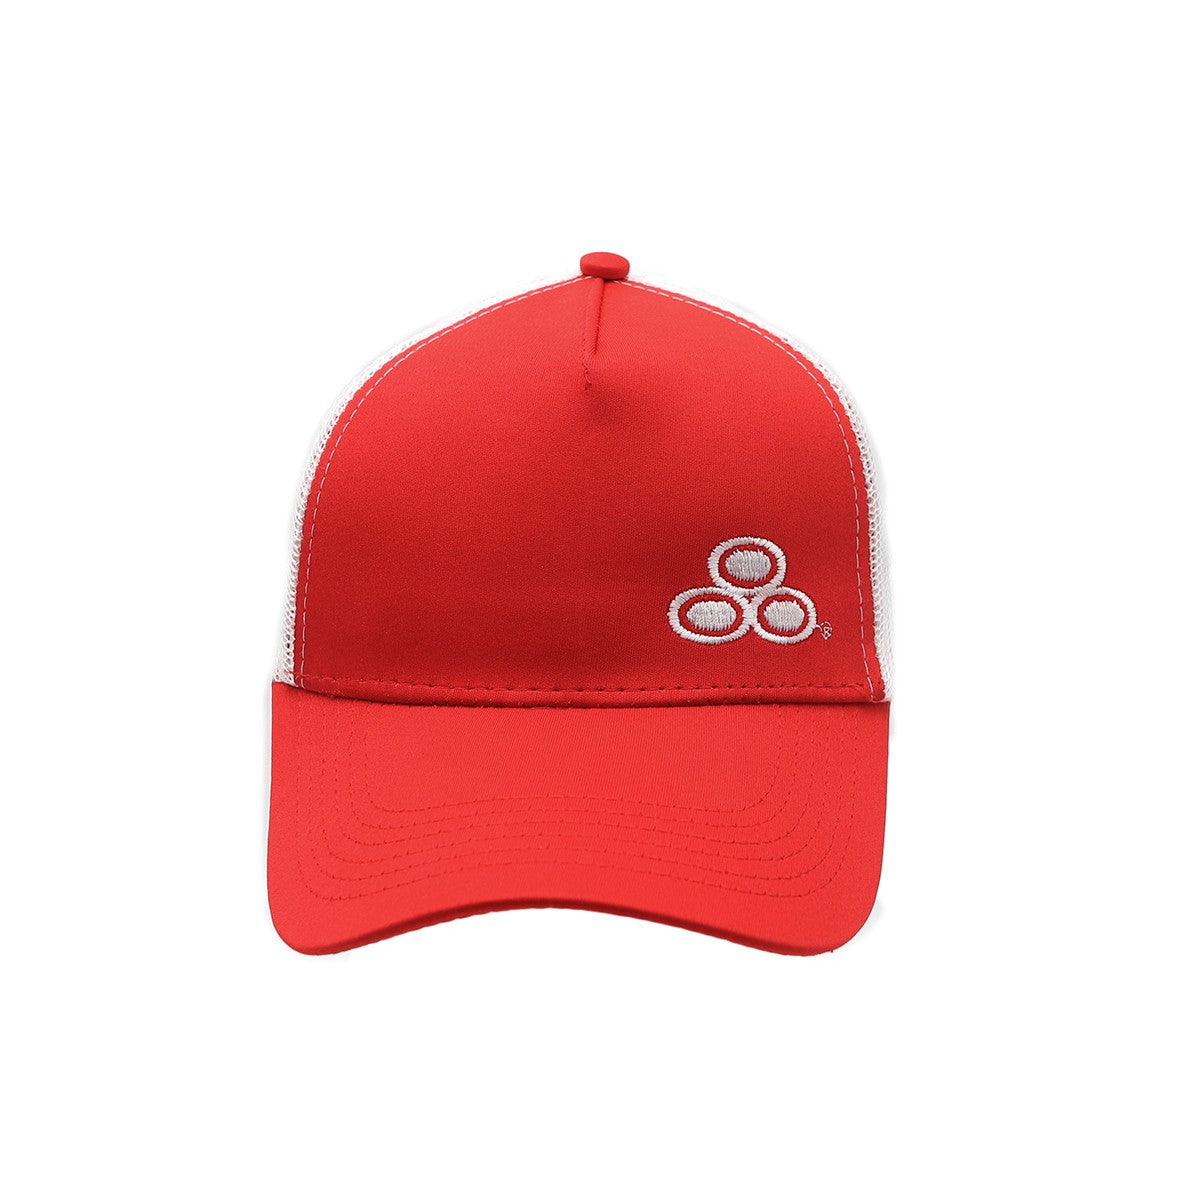 Competitor Mesh Back Hat